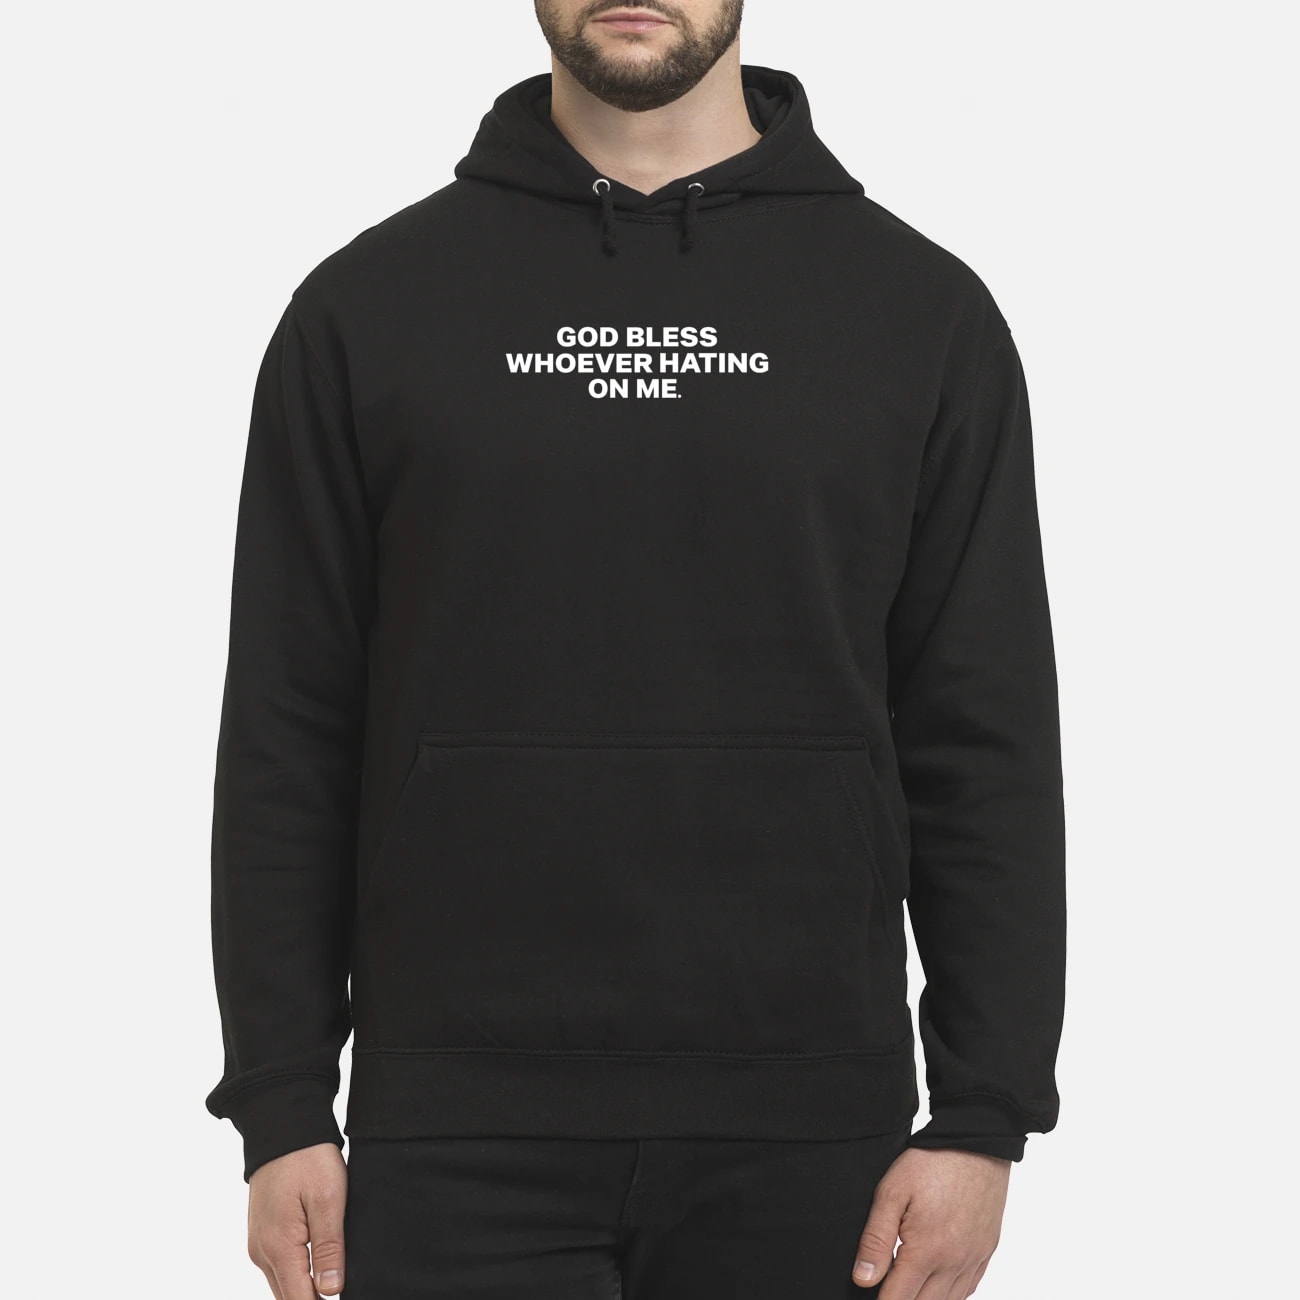 GOD BLESS WHOEVER HATING ON ME SHIRT